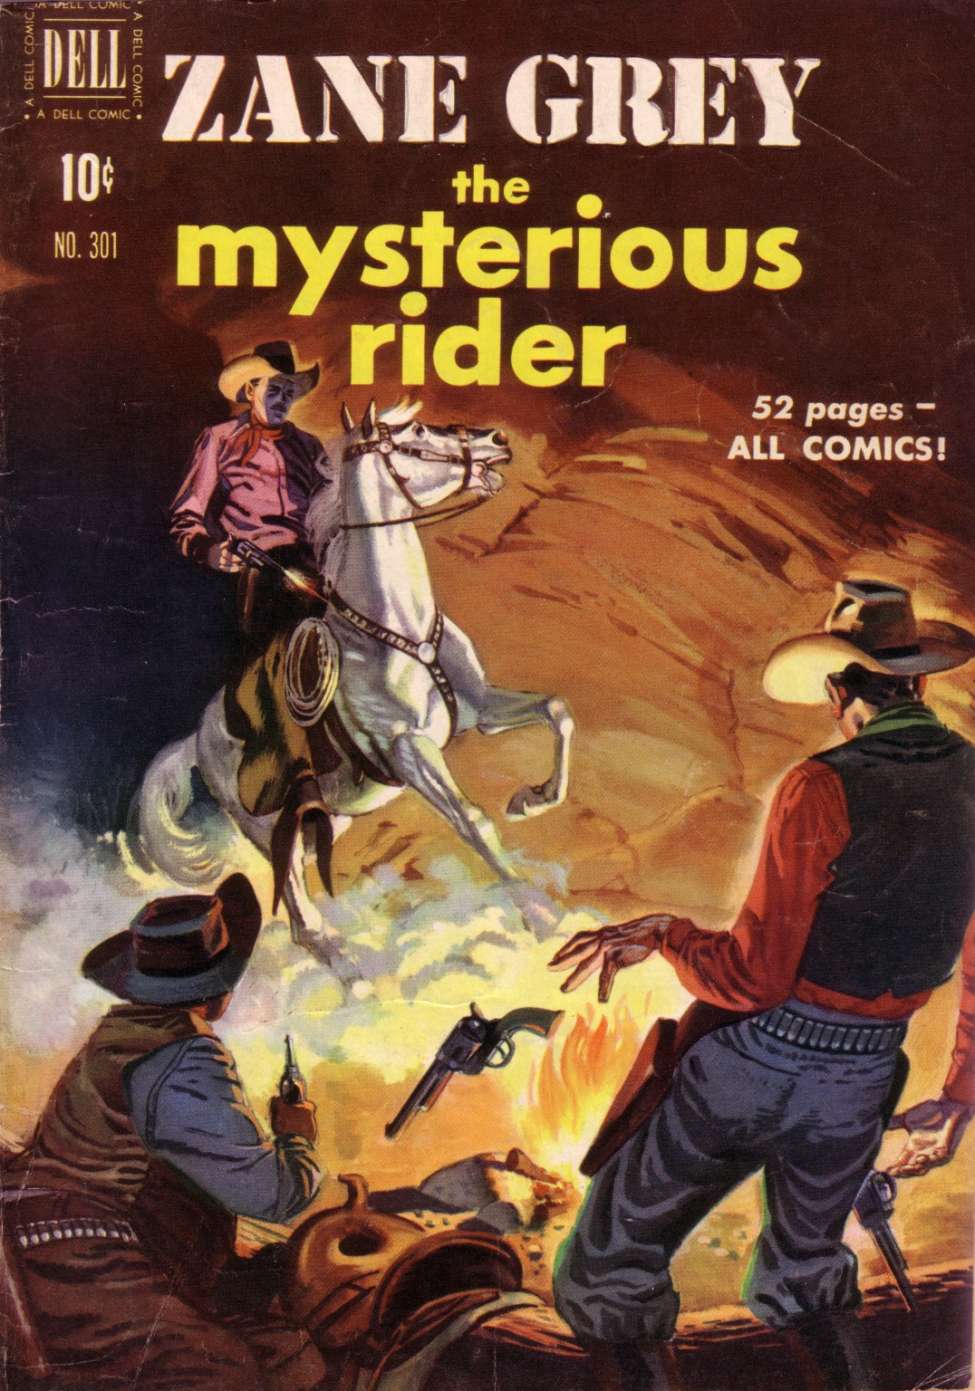 Book Cover For 0301 - Zane Grey's The Mysterious Rider